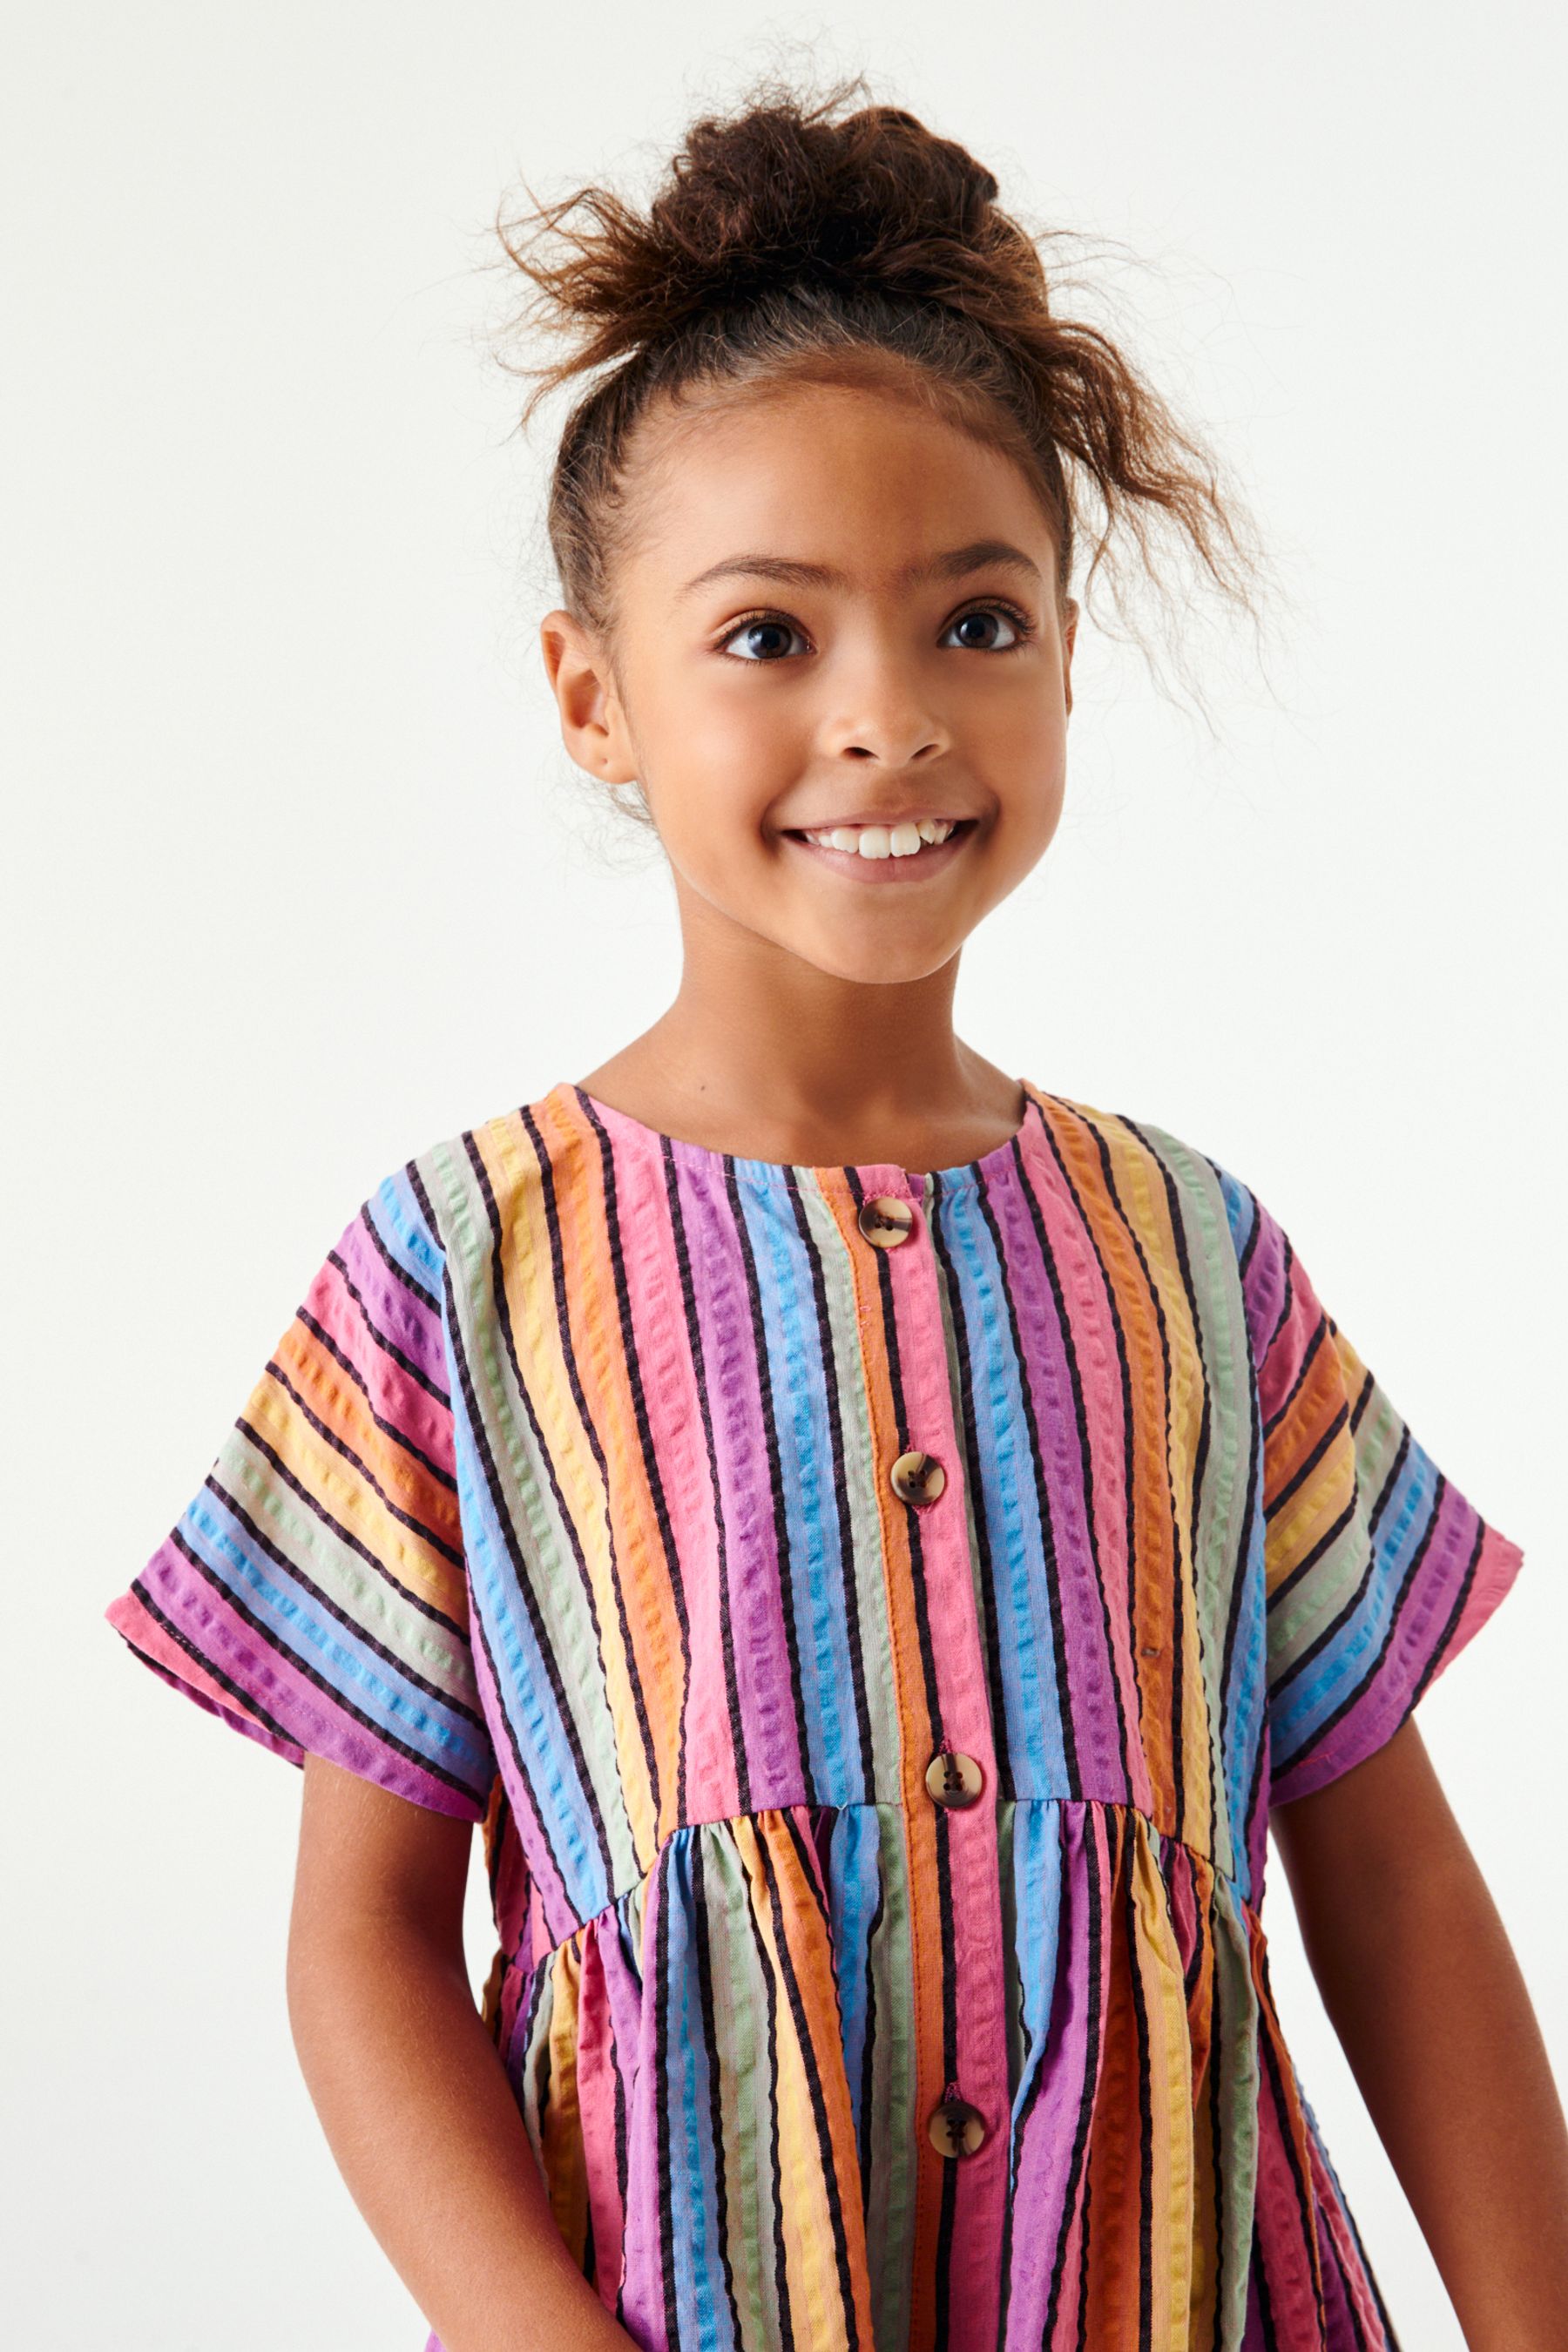 Buy Relaxed Dress (3-16yrs) from Next Ireland